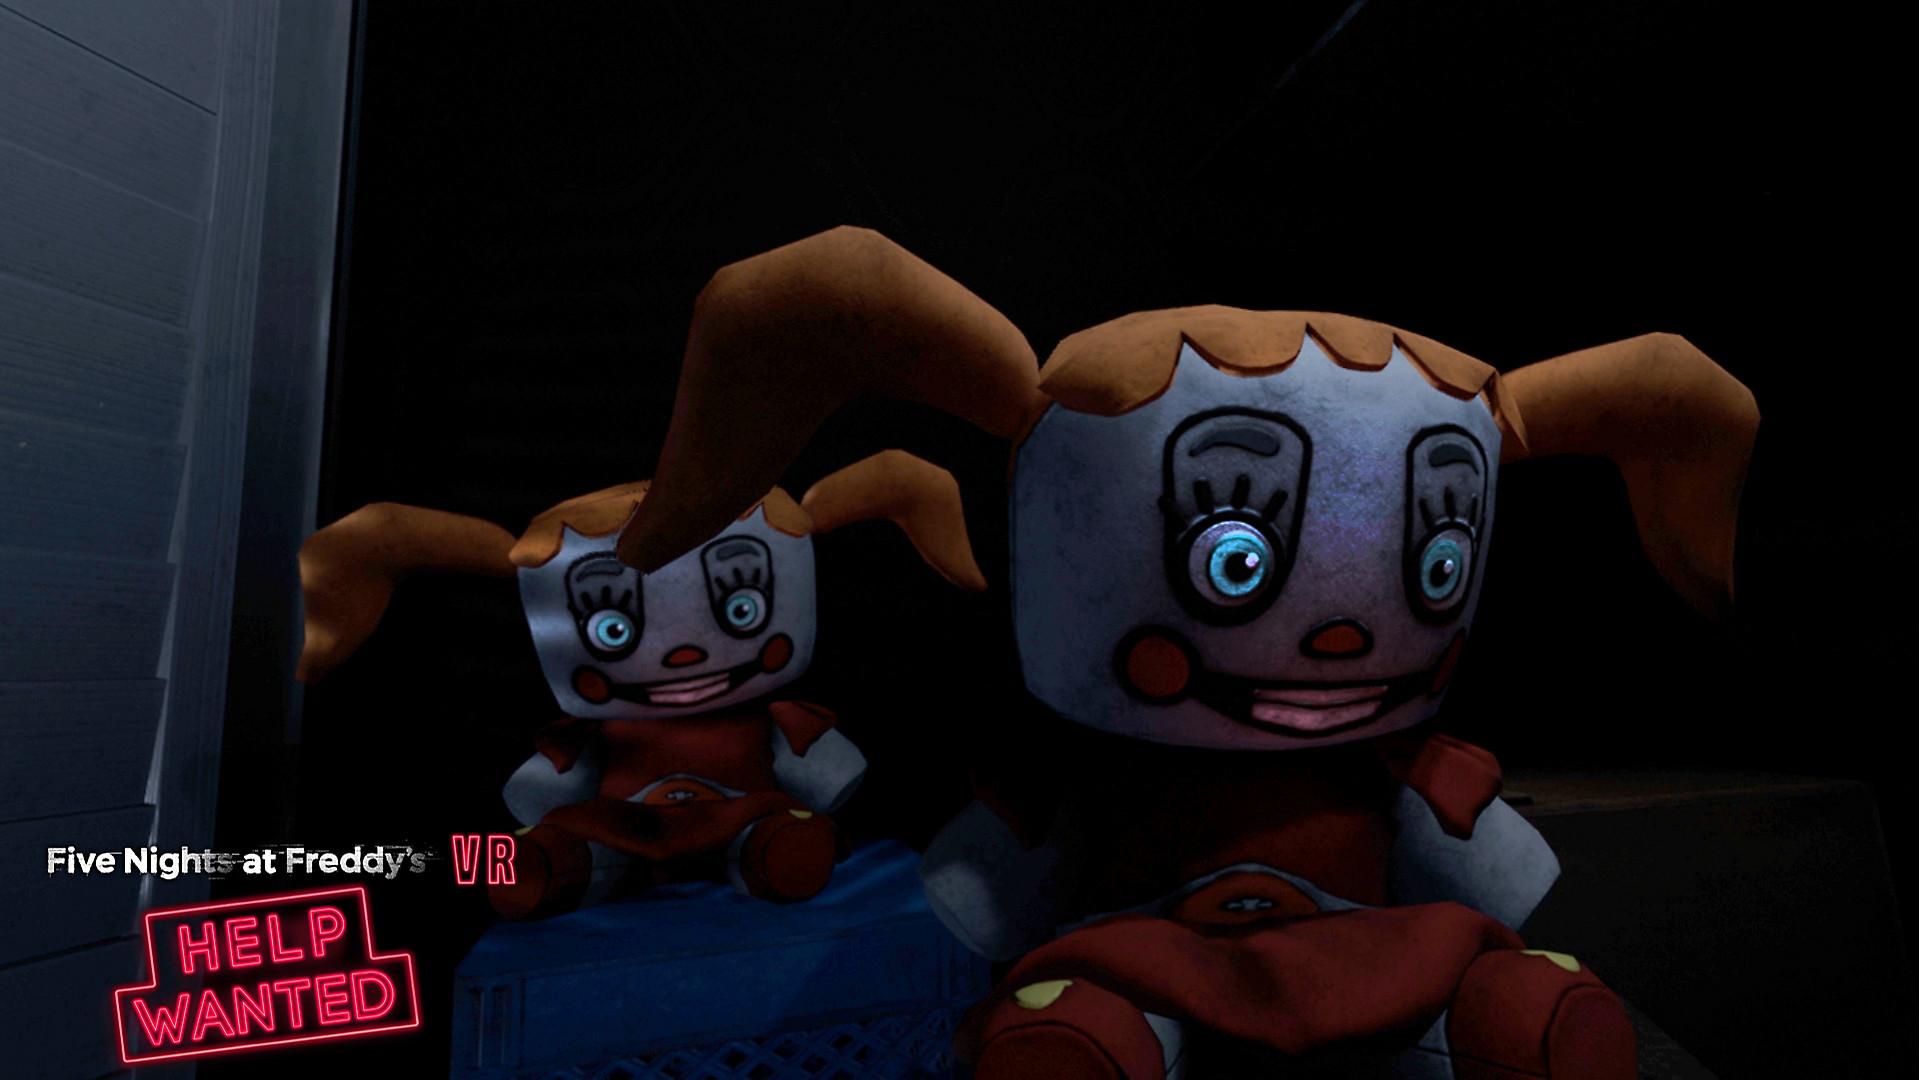 Five Nights At Freddy's VR: Help Wanted. Five Nights At